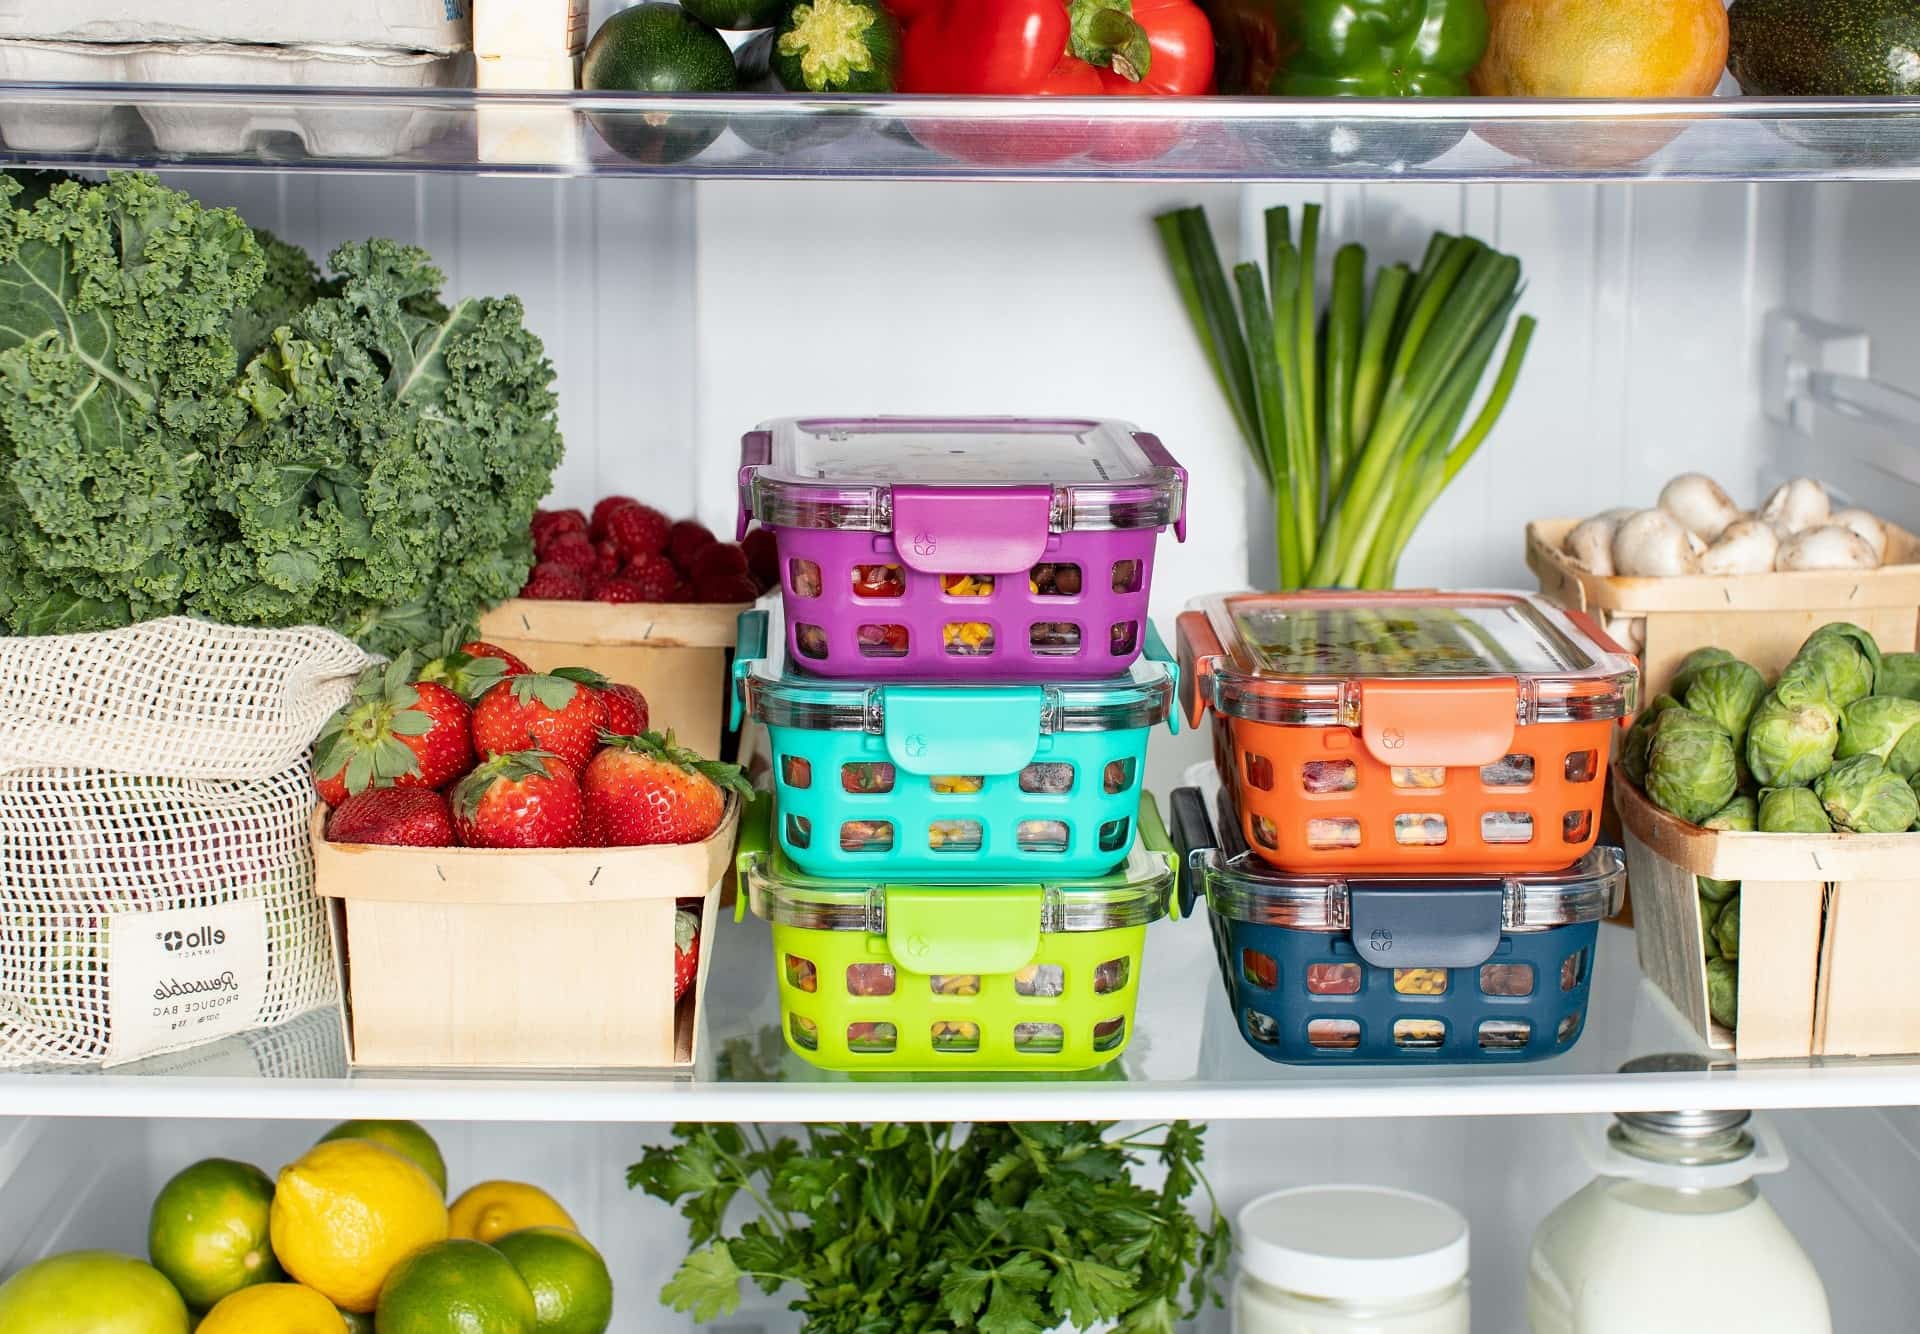 How To Organize Produce In Fridge